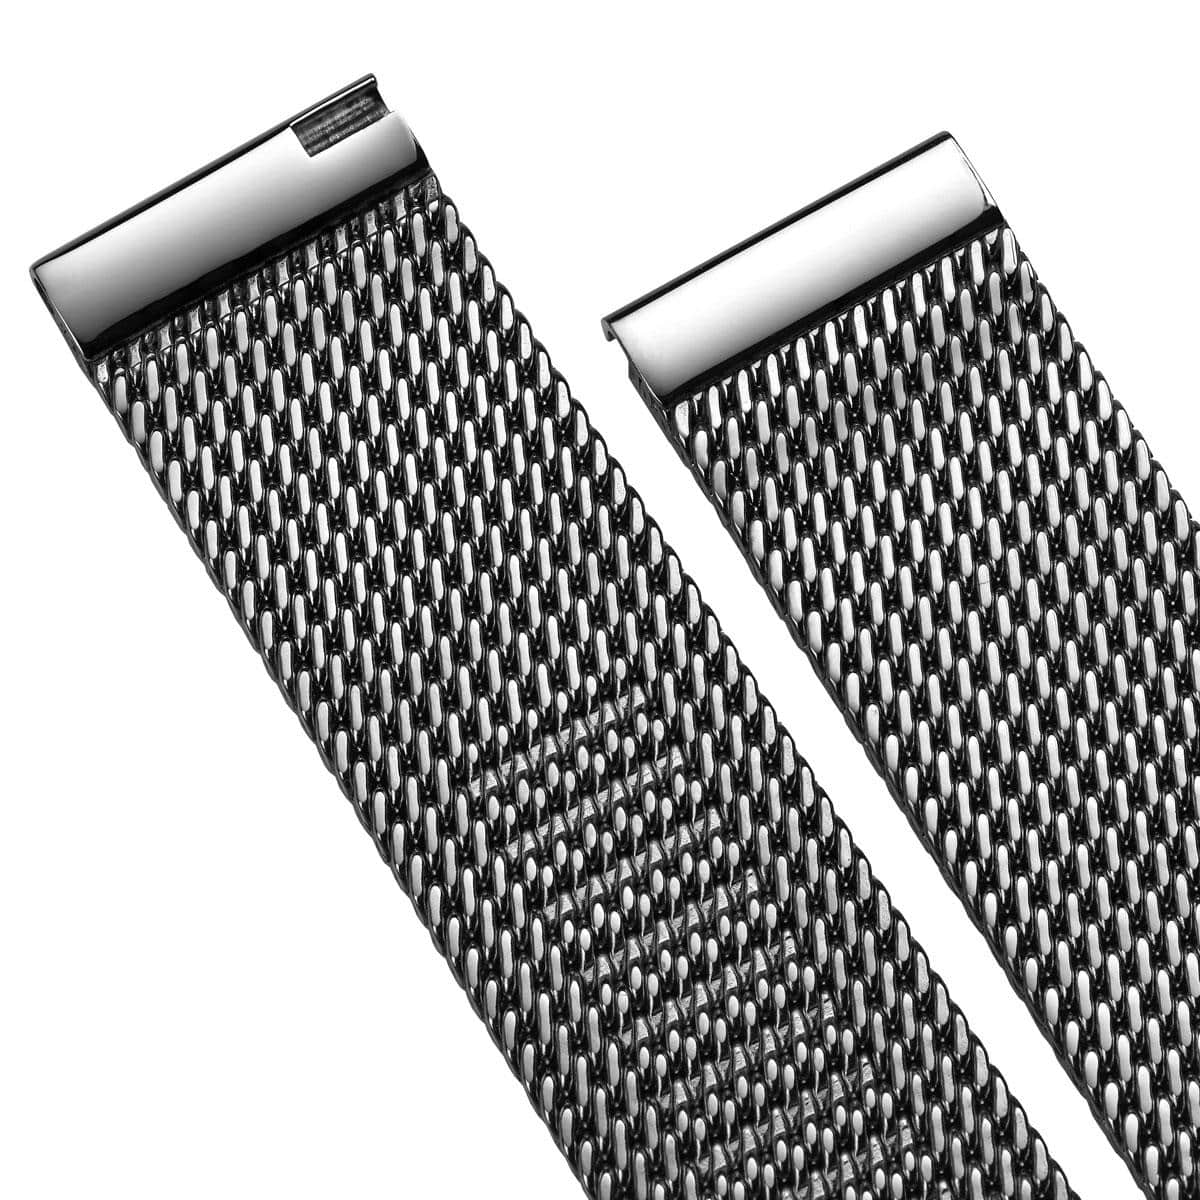 WatchGecko 'Oblique' Milanese Mesh Stainless Steel Watch Strap - Polished